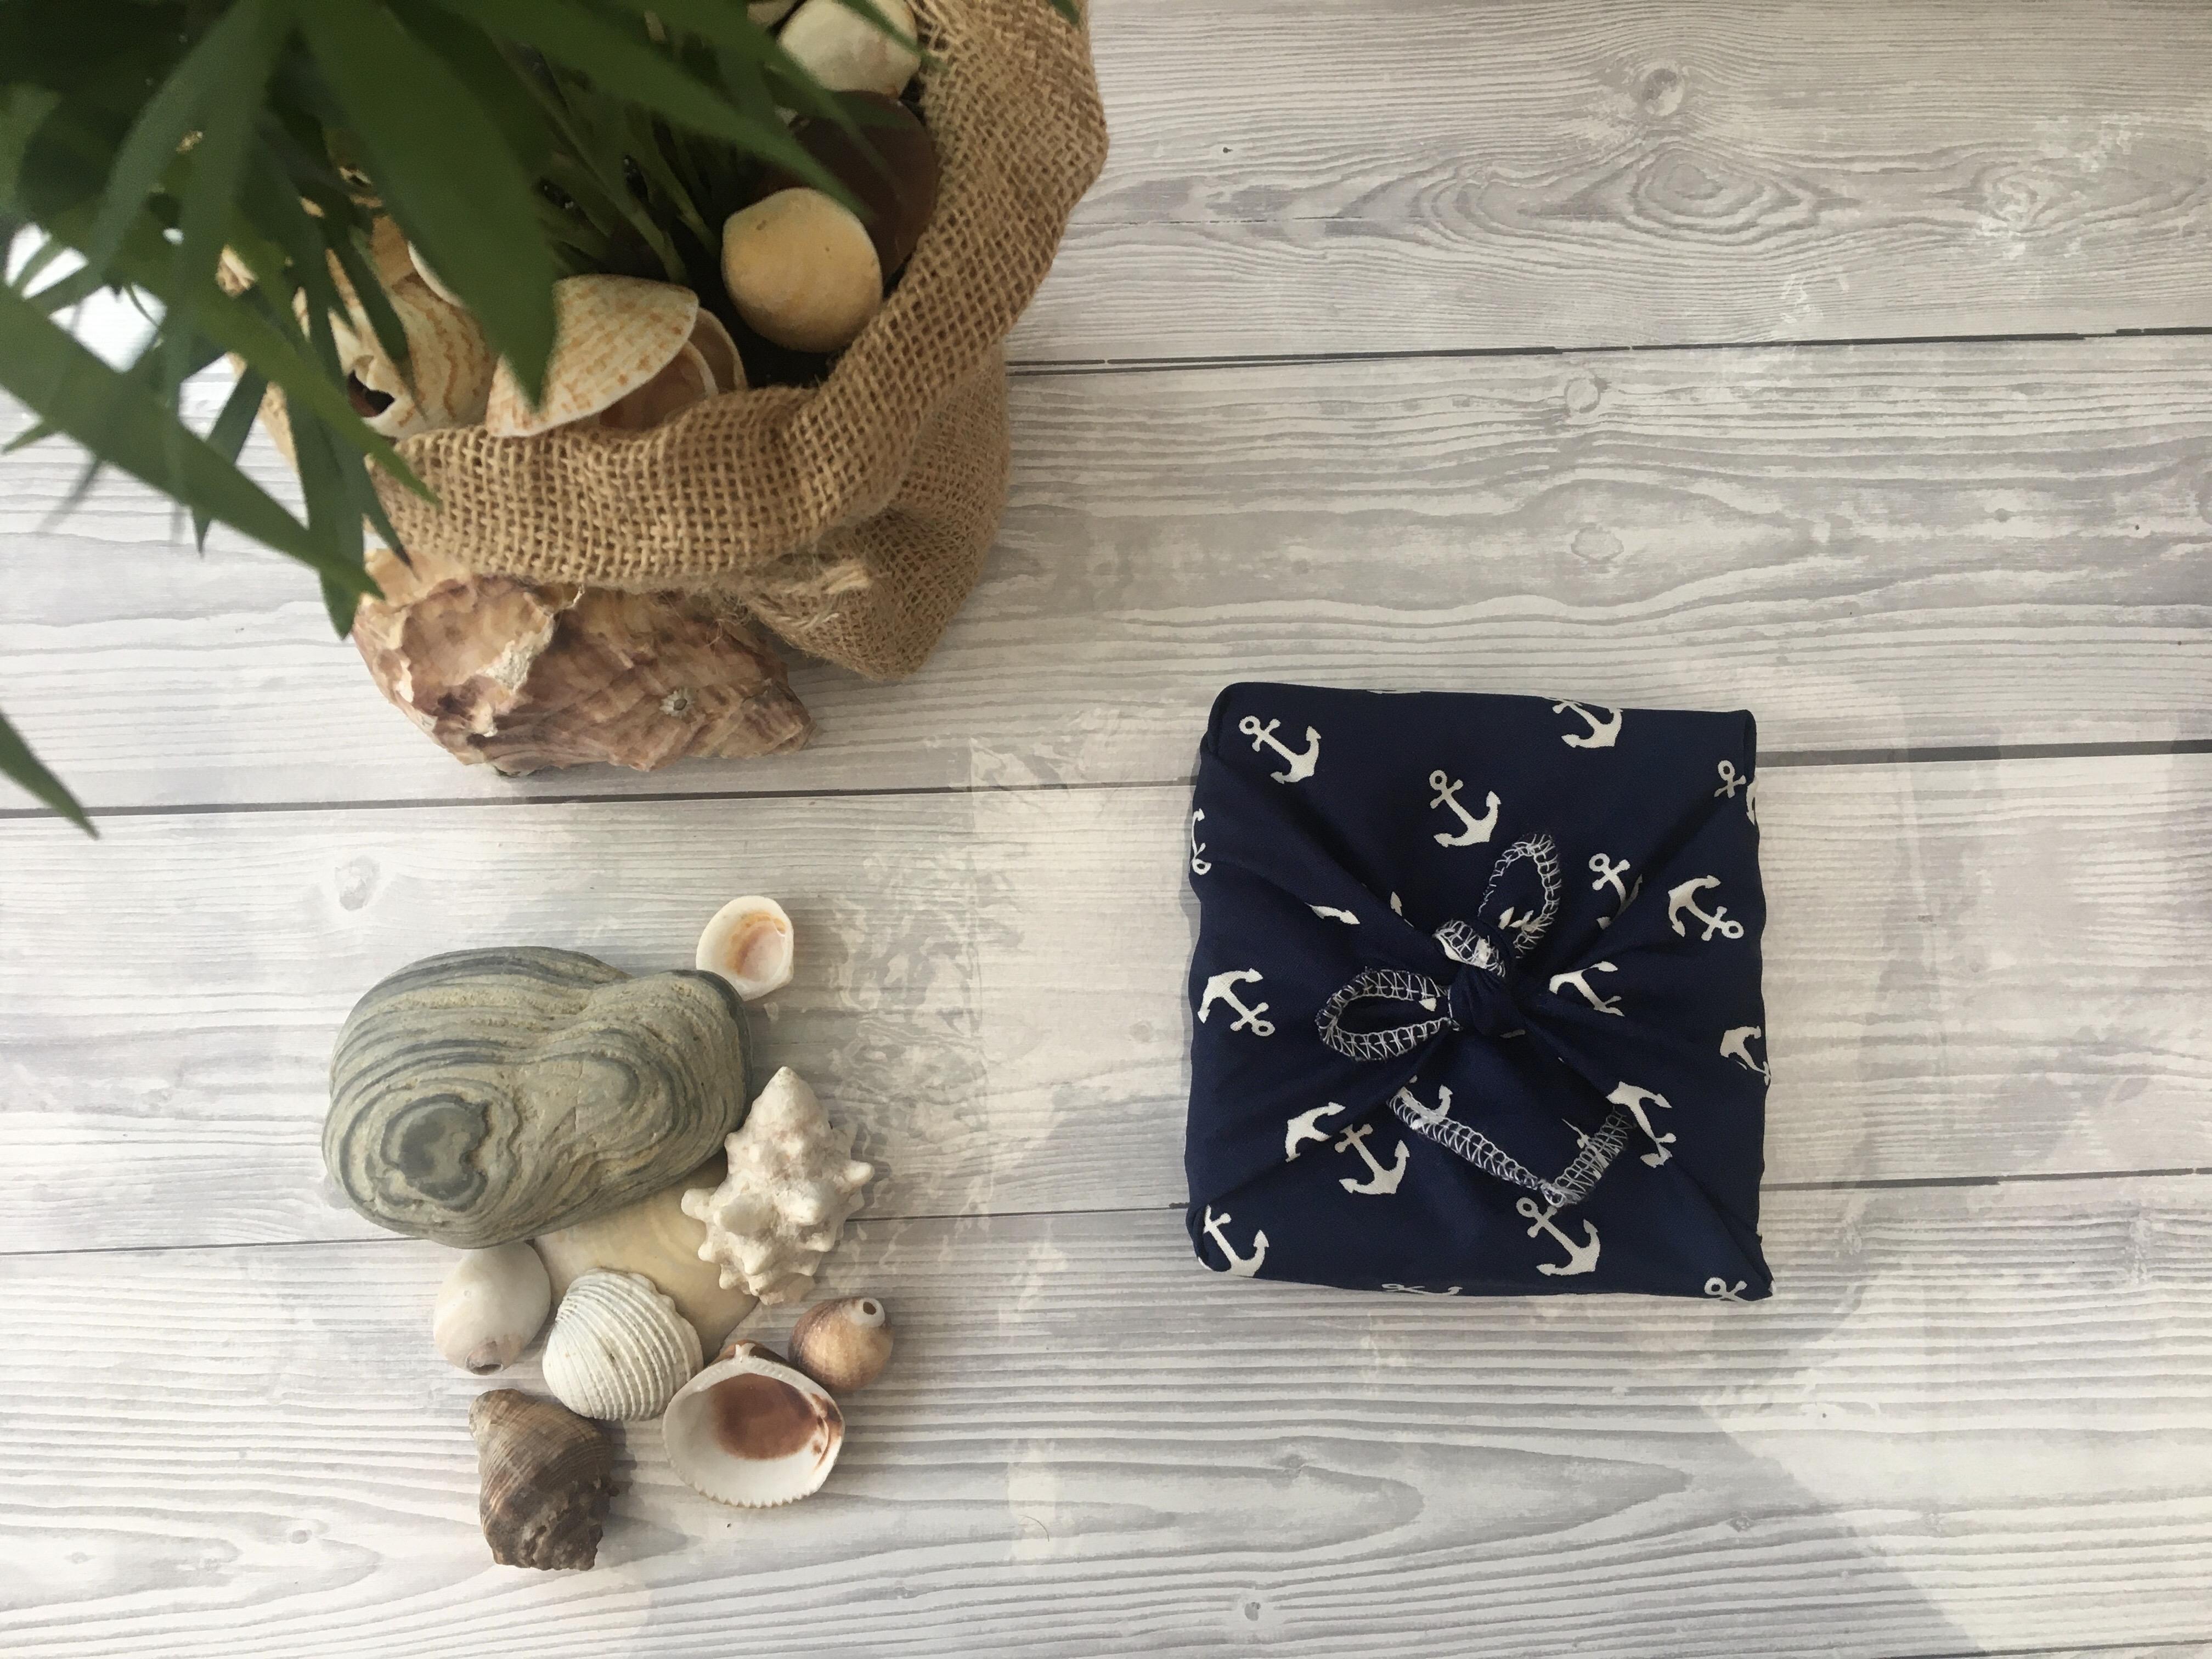 gift wrapped with navy blue and white anchors fabric gift wrap